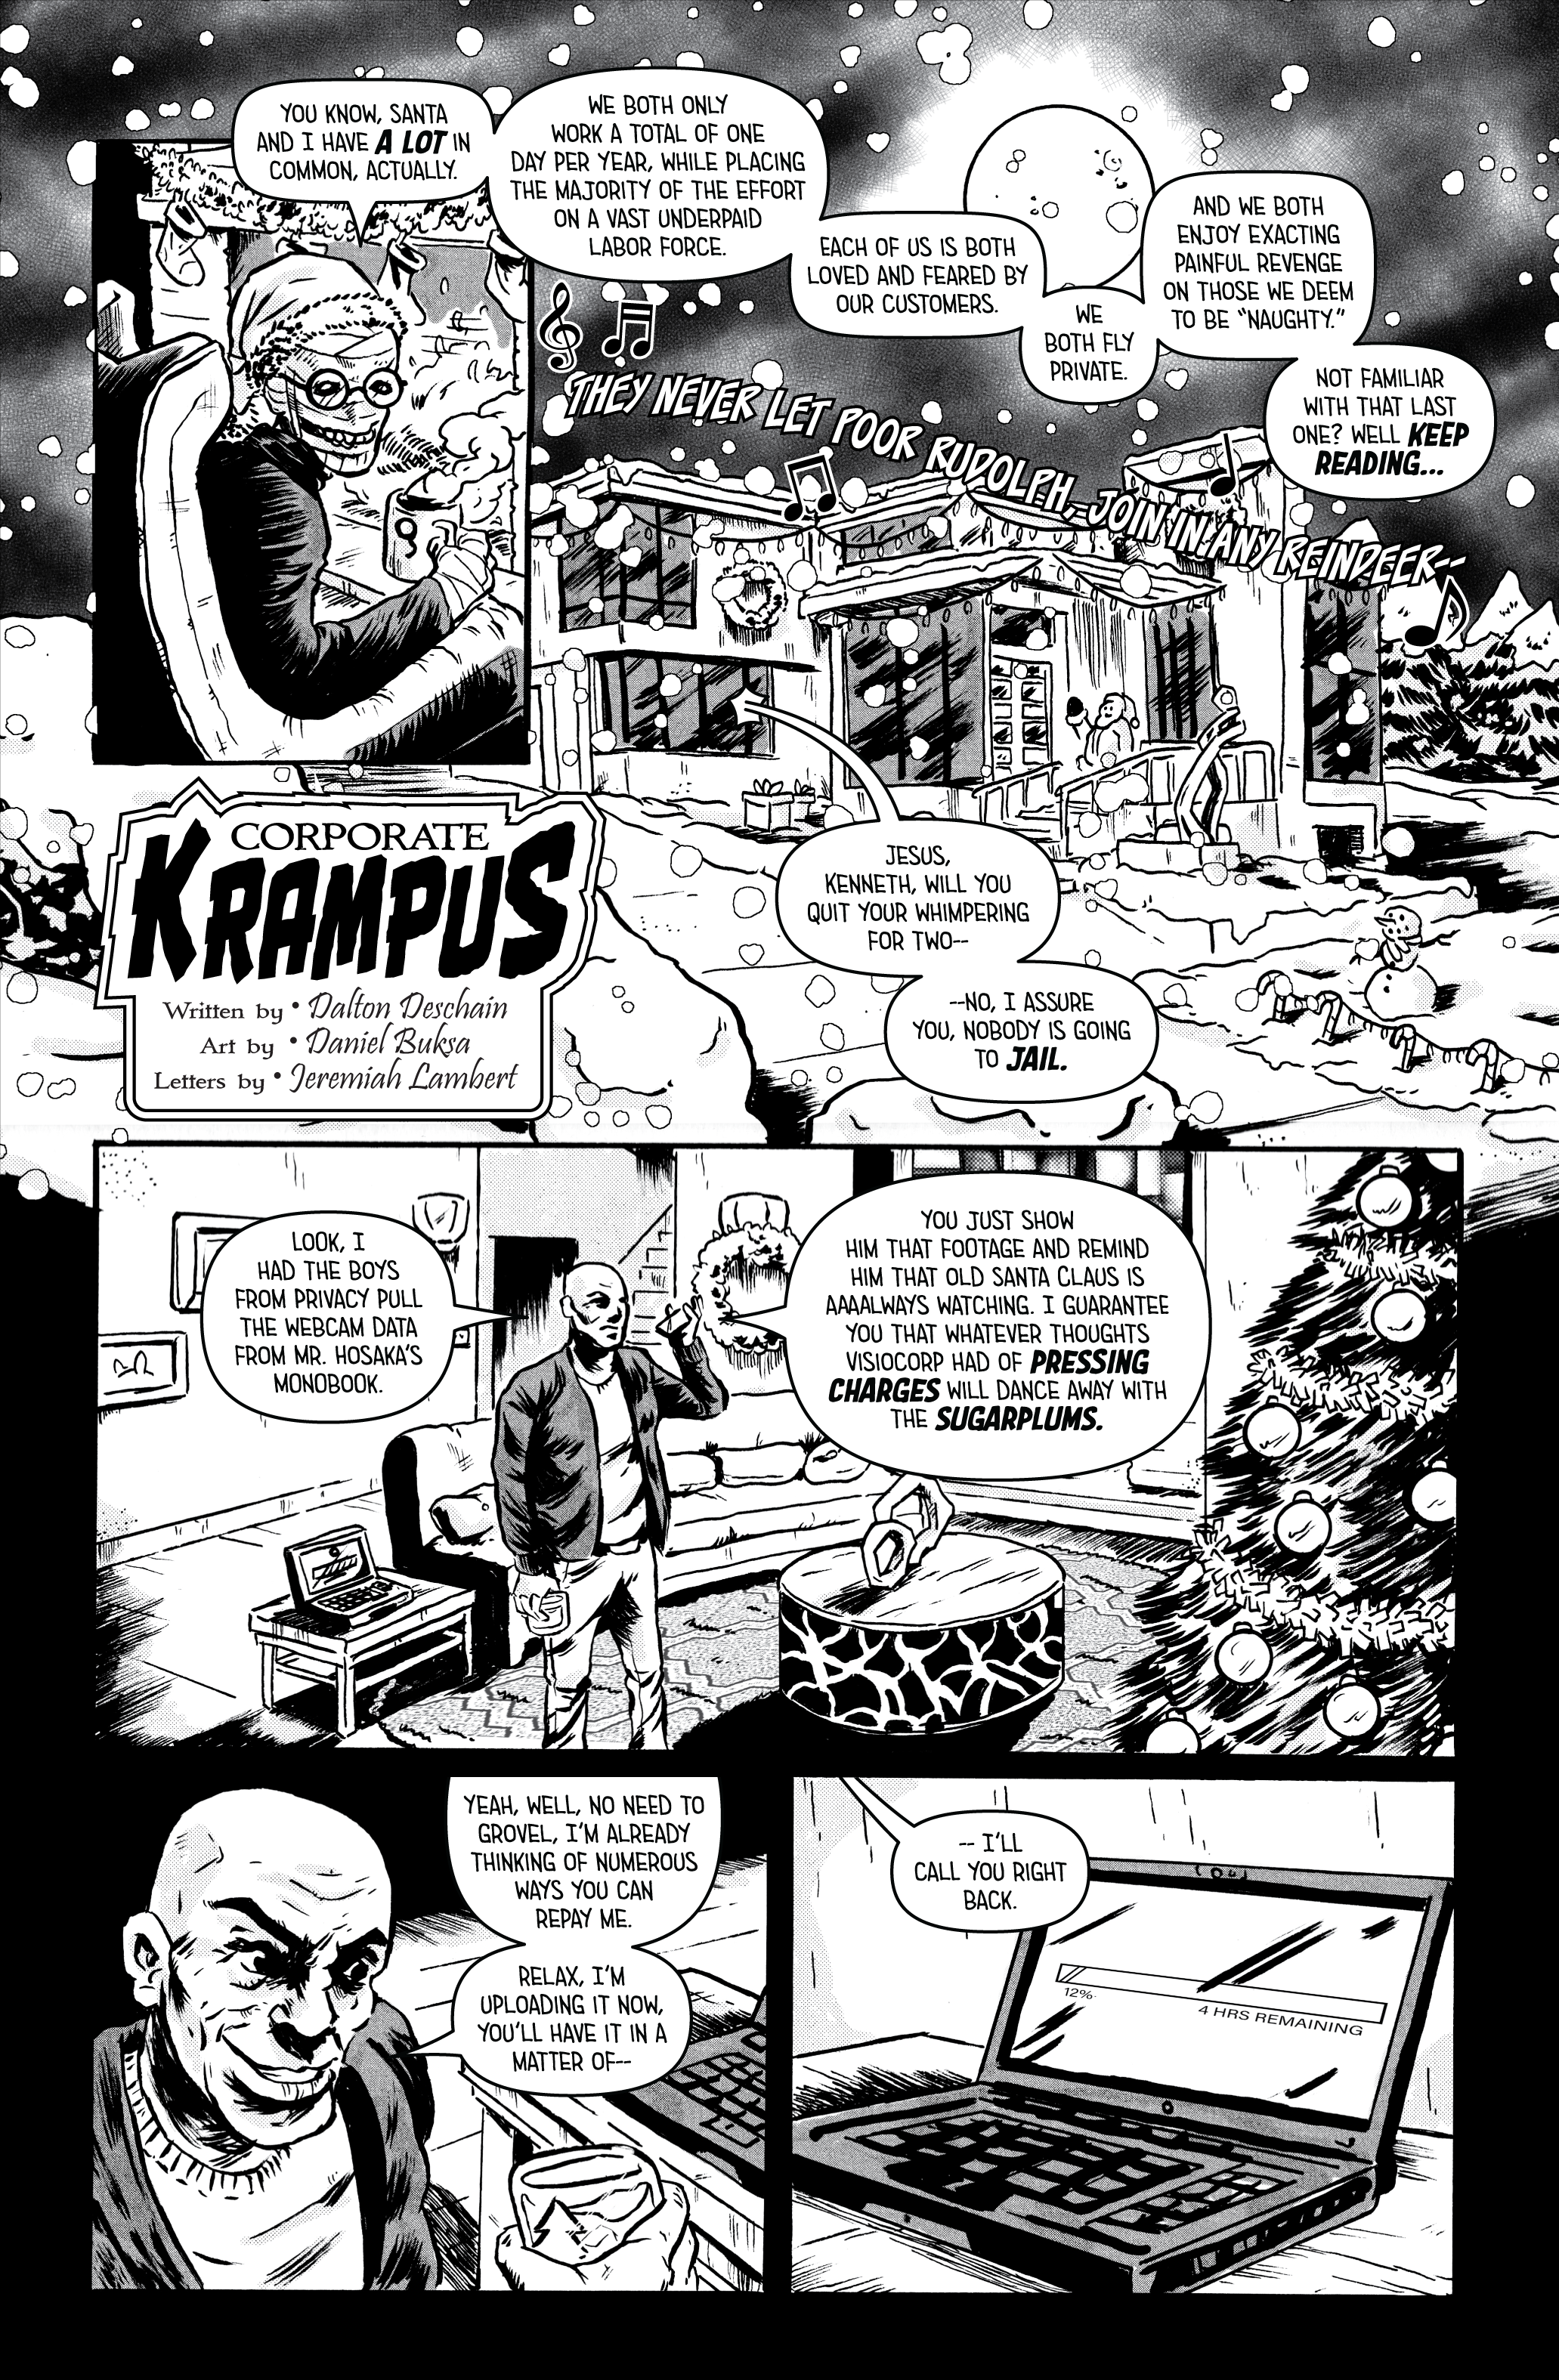 Monocul issue 06 story 01 pg 01 - Corporate Krampus-01.png